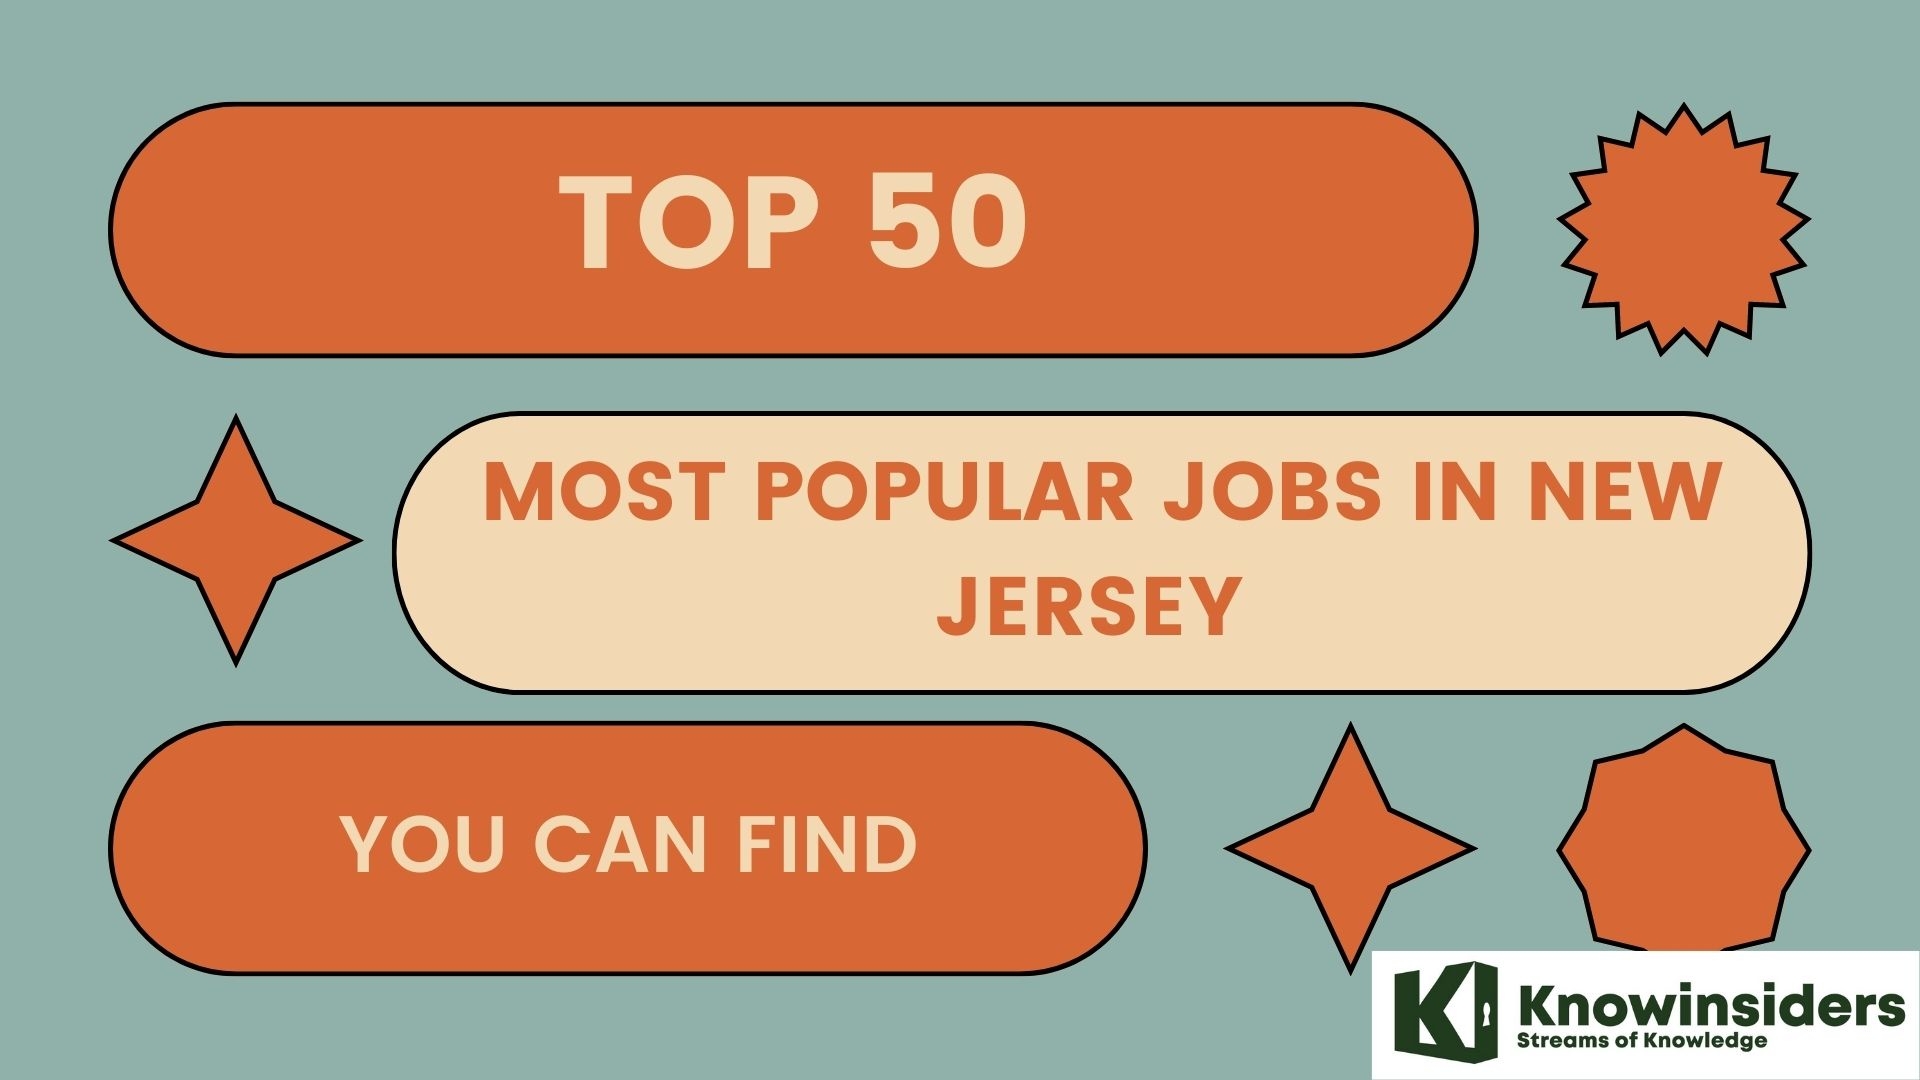 Top 50 Most Popular Jobs In New Jersey That You Can Find